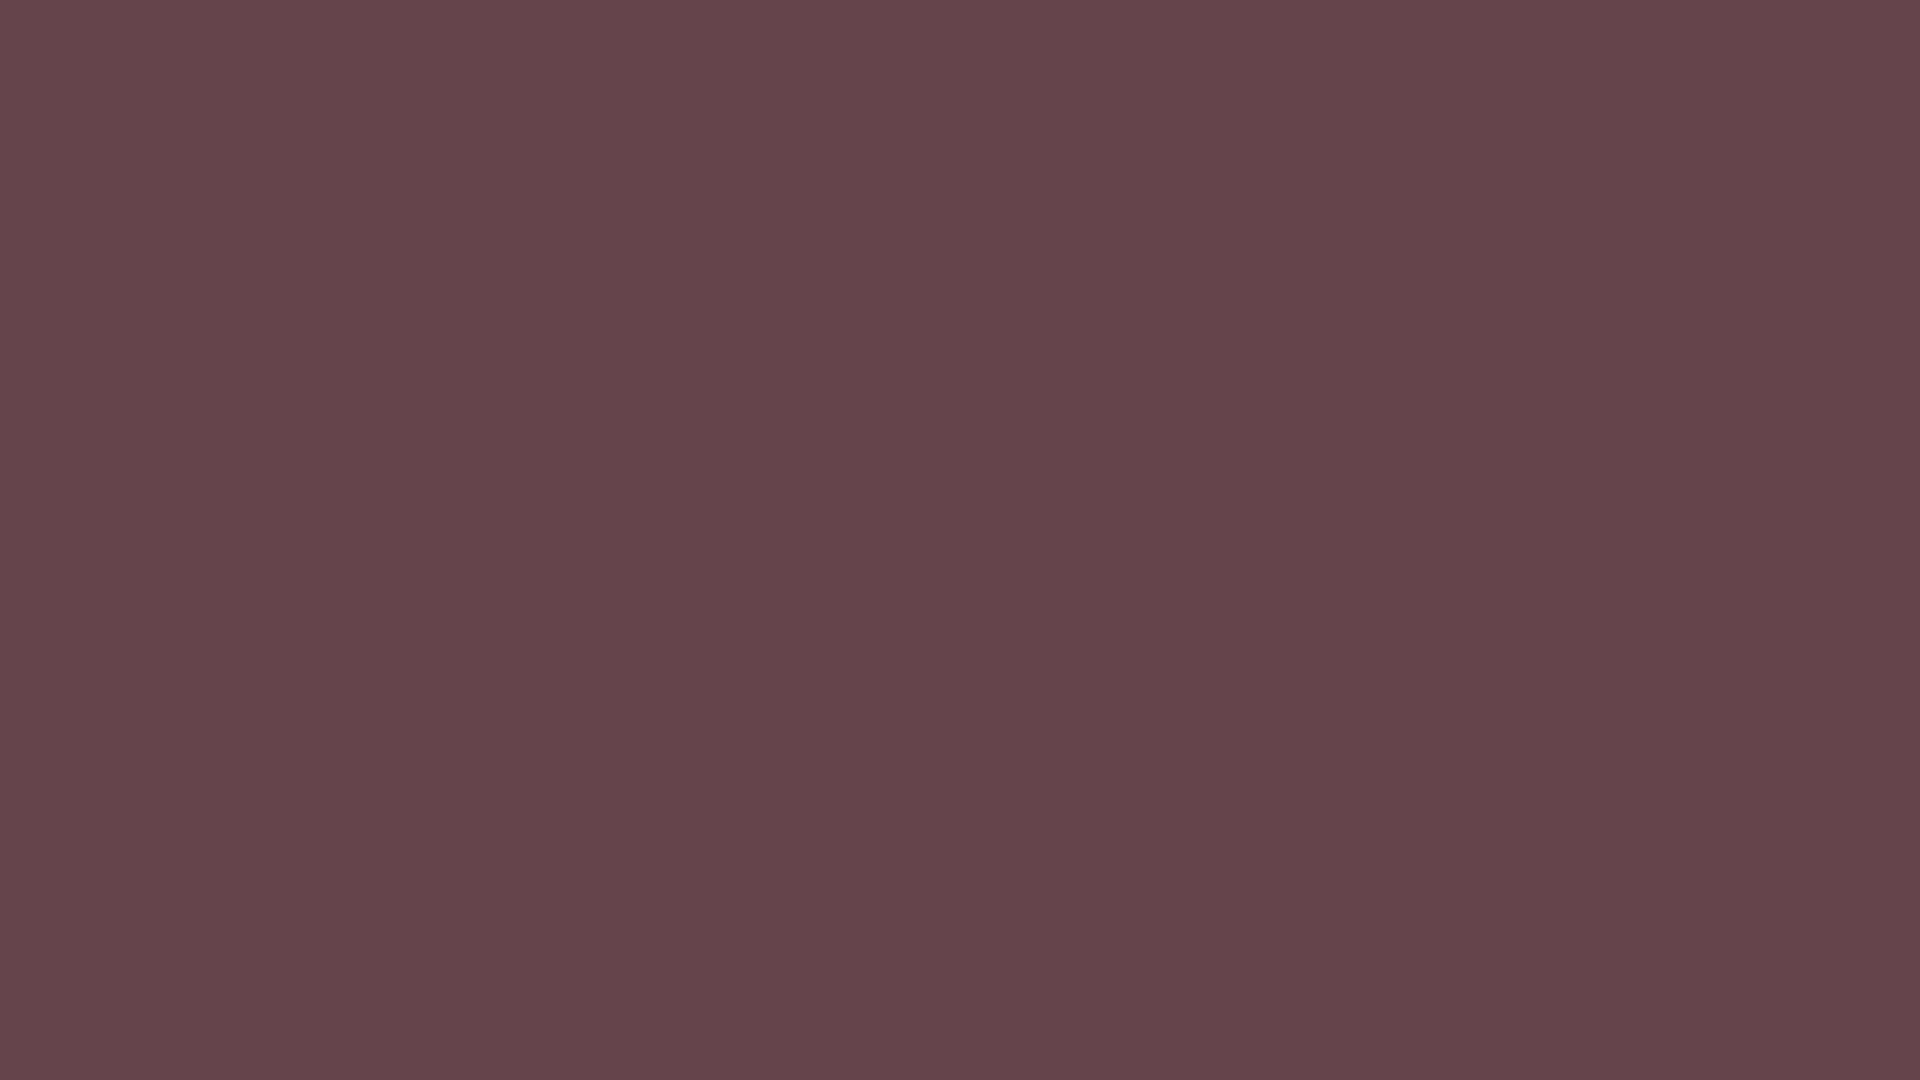 1920x1080 Deep Tuscan Red Solid Color Background